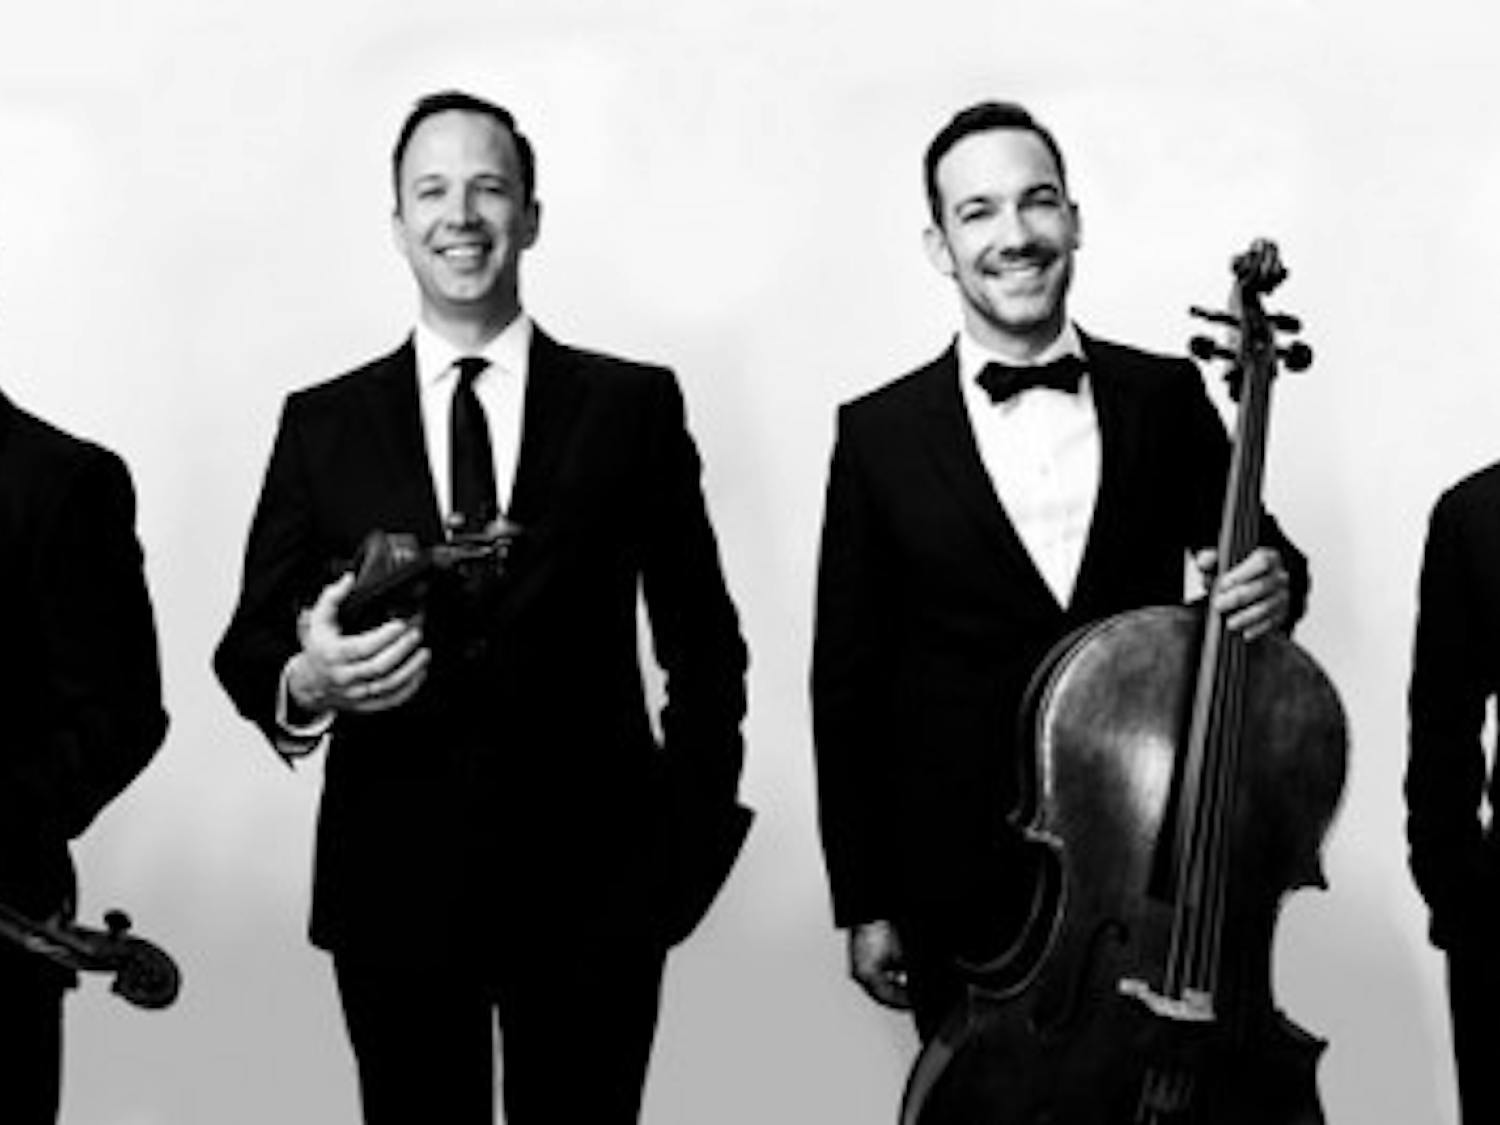 The Miro Quartet&rsquo;s performance in the Lippes Concert Hall in Slee Hall this weekend is one of many events students can attend if they need something to do with their sweetheart on campus. Saturday&rsquo;s concert starts at 7:30 p.m.&nbsp;Courtesy of Michael Carter